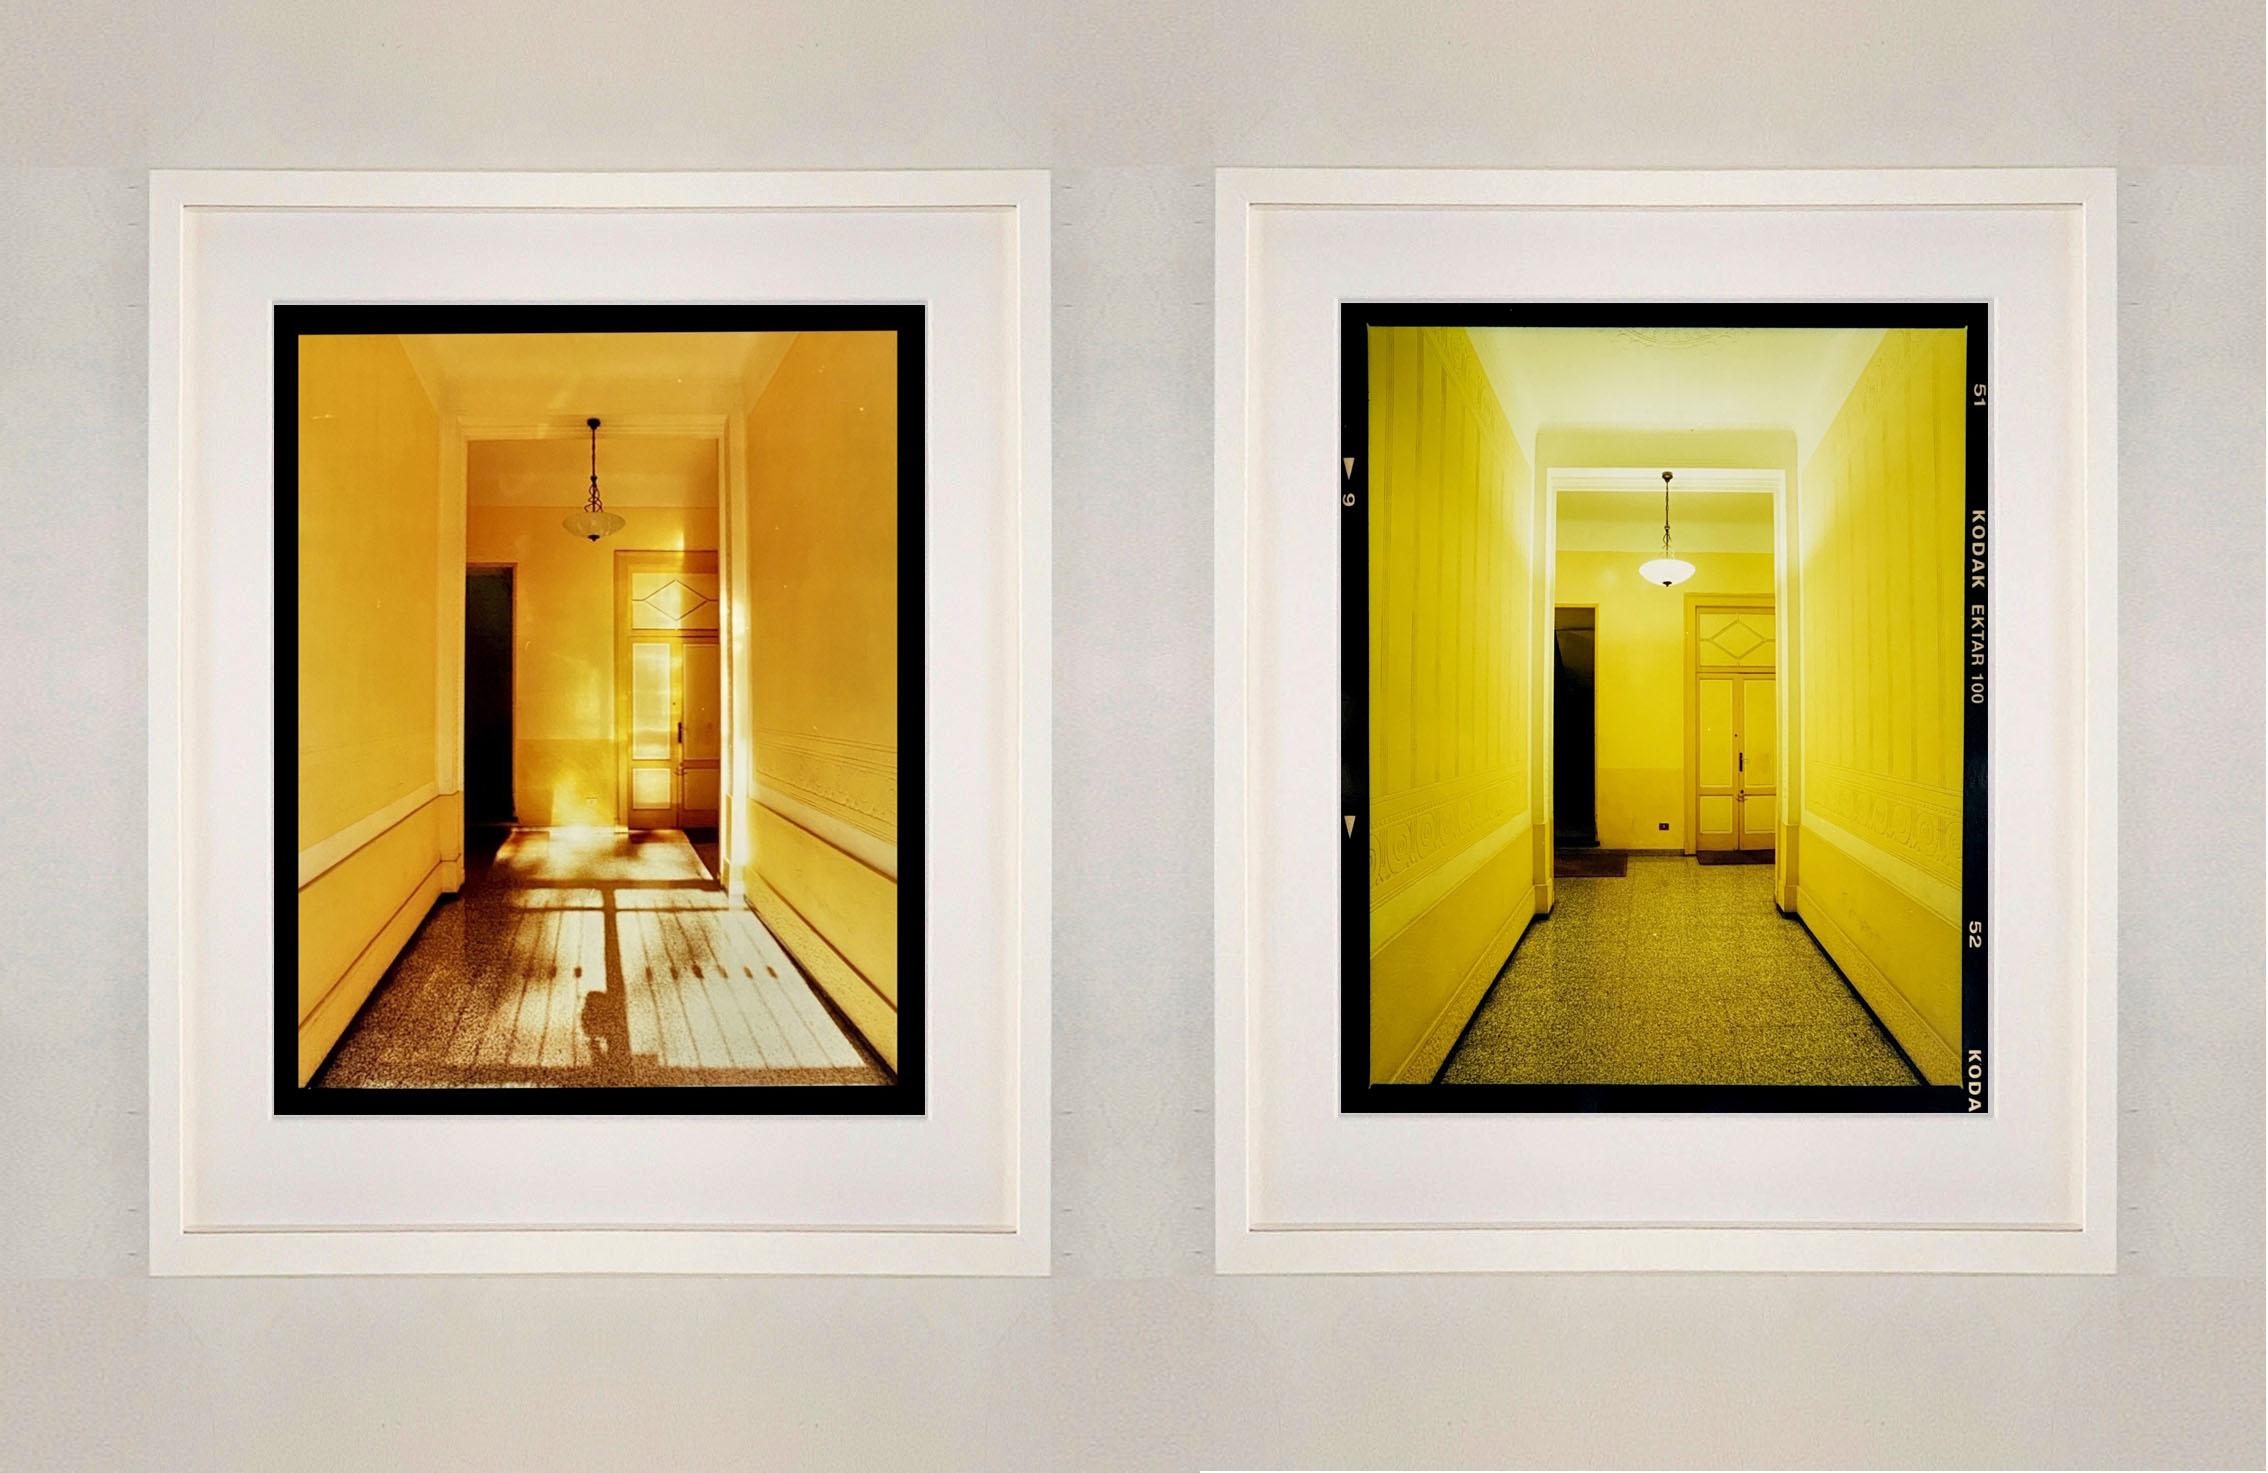 Yellow Corridor Day & Night, from Richard Heeps series, 'A Short History of Milan' which began in November 2018 for a special project featuring at the Affordable Art Fair Milan 2019 and the series is ongoing.
There is a reoccurring linear,